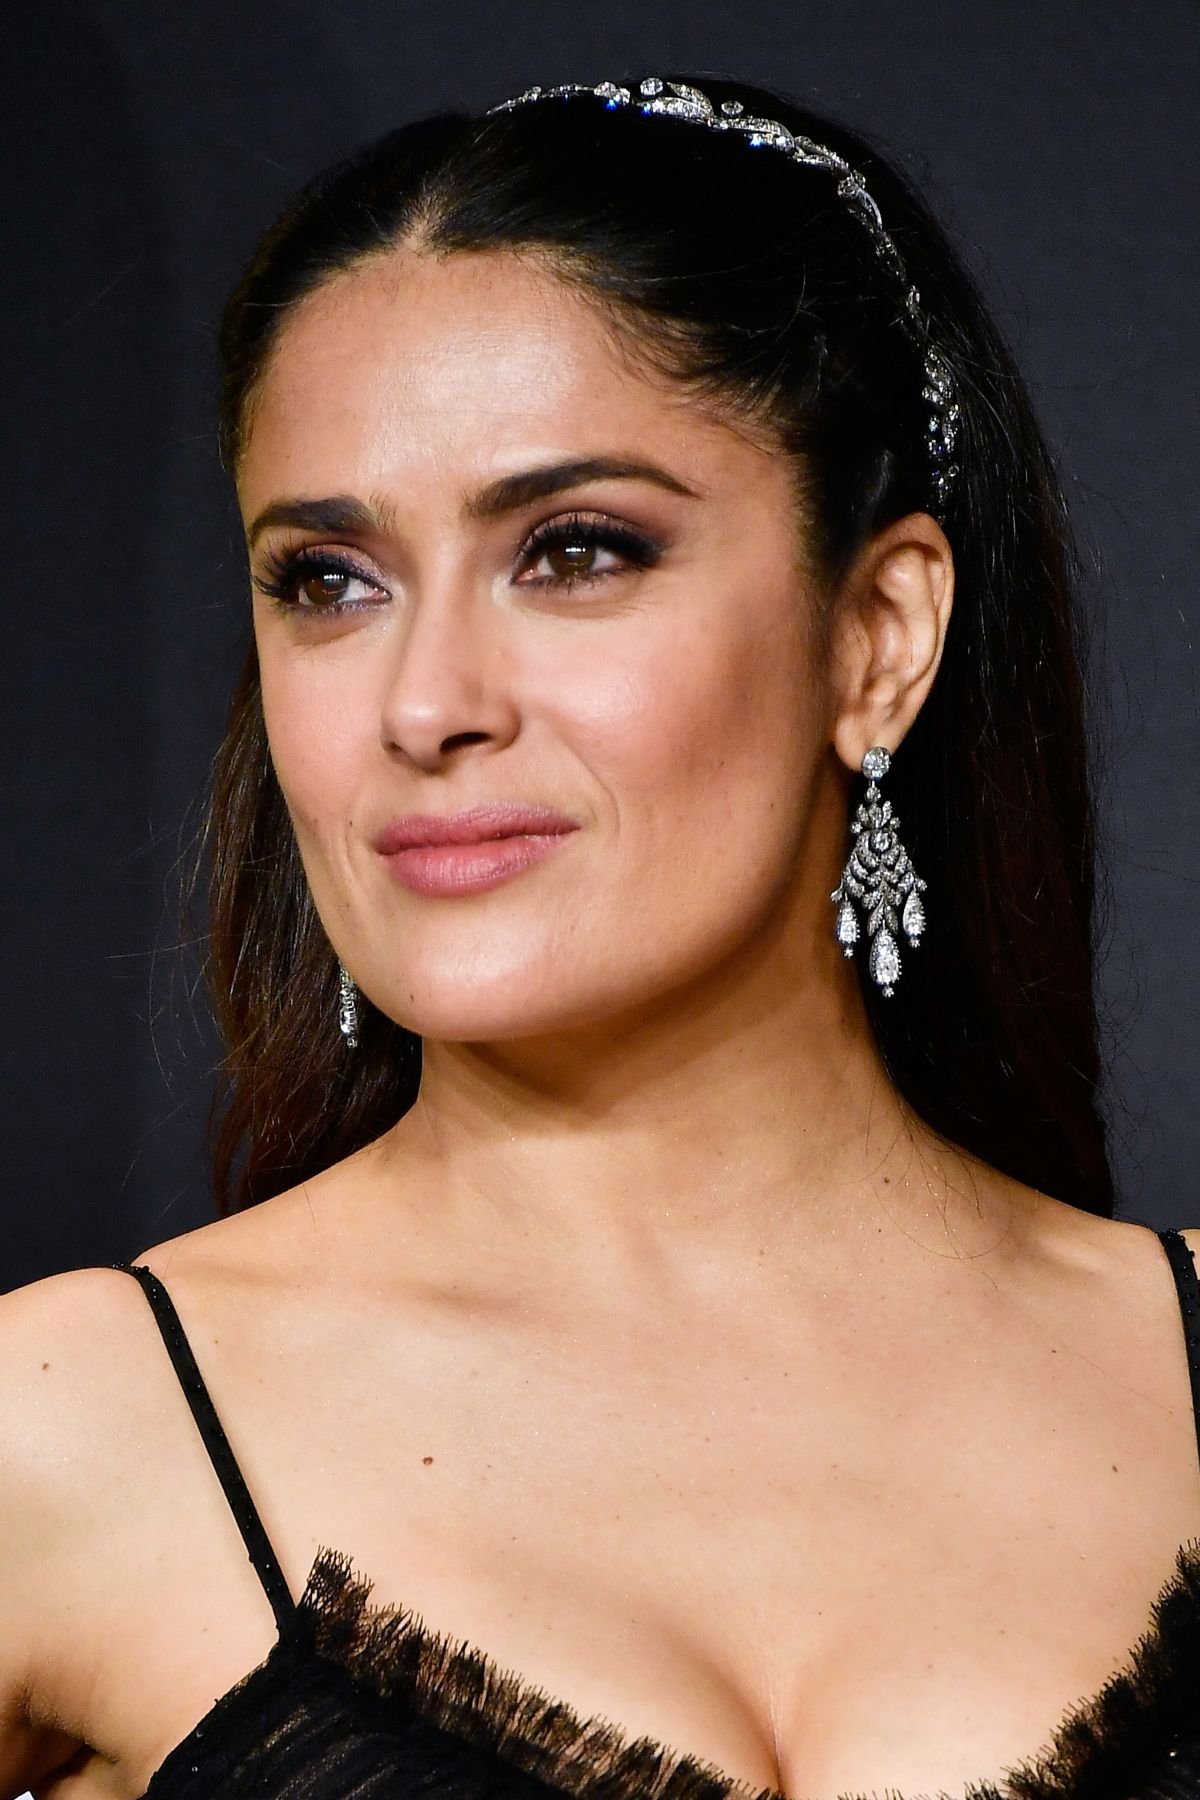 HOLLYWOOD, CA - FEBRUARY 26: Actor Salma Hayek poses in the press room during the 89th Annual Academy Awards at Hollywood & Highland Center on February 26, 2017 in Hollywood, California. Frazer Harrison/Getty Images/AFP